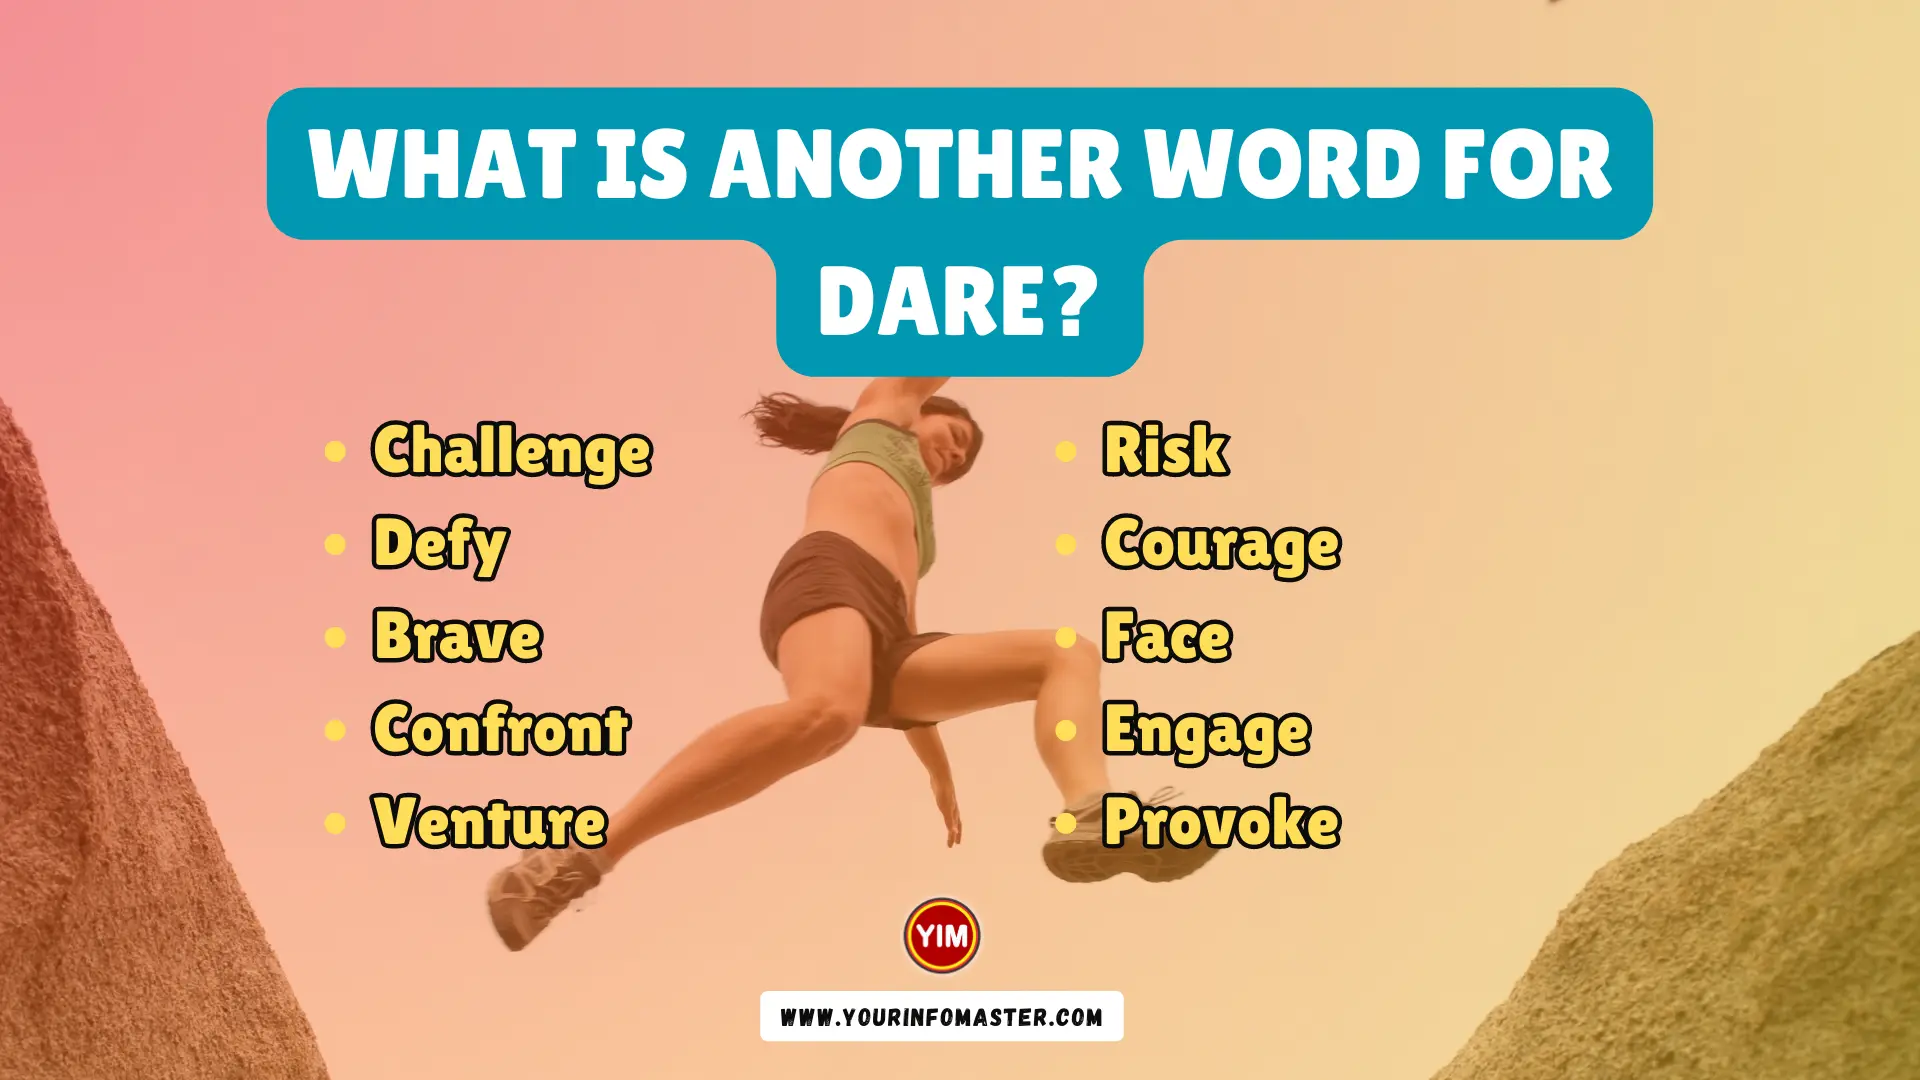 What is another word for Dare